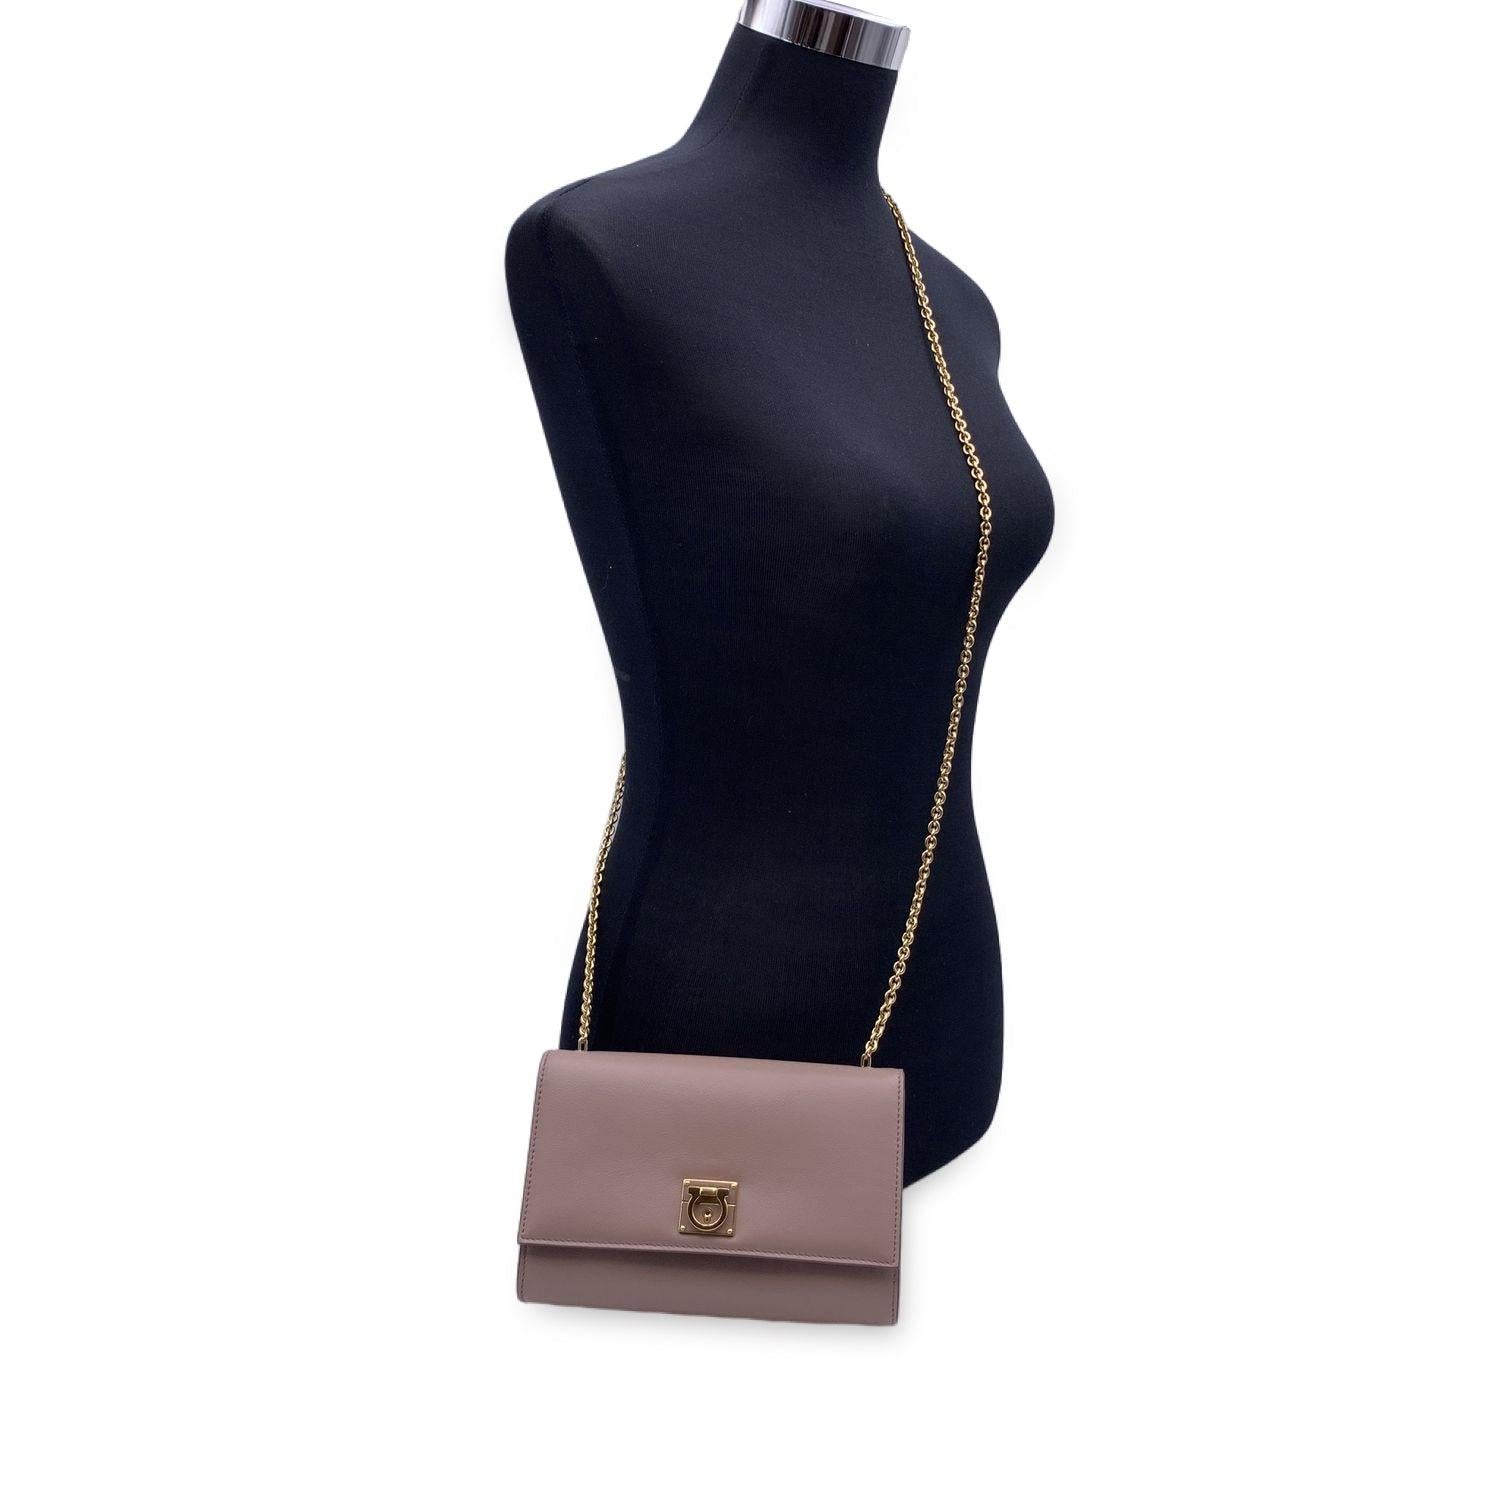 This beautiful Bag will come with a Certificate of Authenticity provided by Entrupy. The certificate will be provided at no further cost. Salvatore Ferragamo leather shoulder bag featuring Gancino lock closure. Gold metal hardware. Removable chain